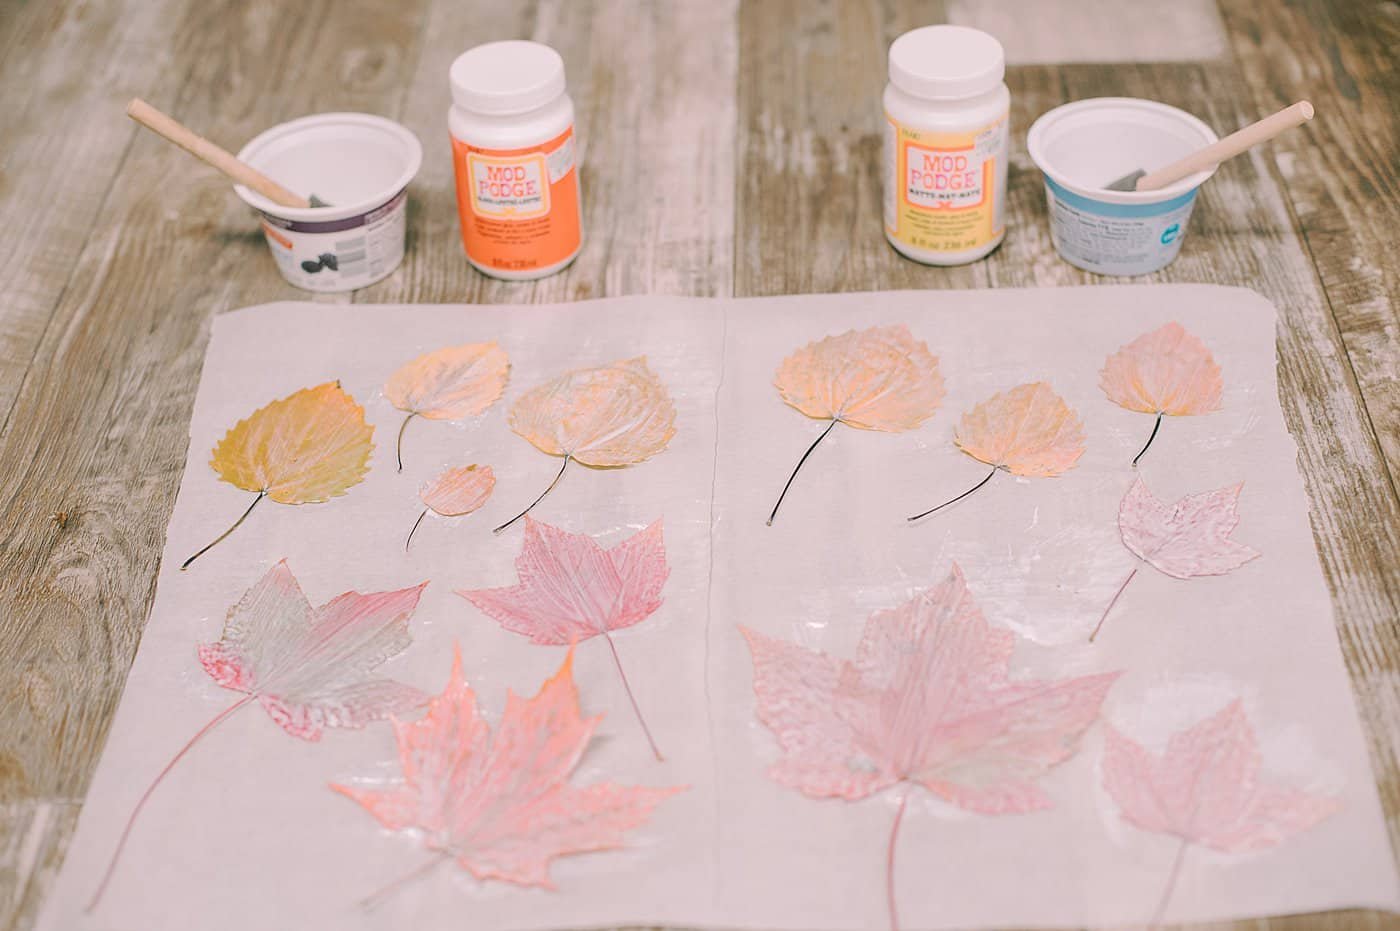 Leaves covered with a layer of Mod Podge, both matte and gloss versions.